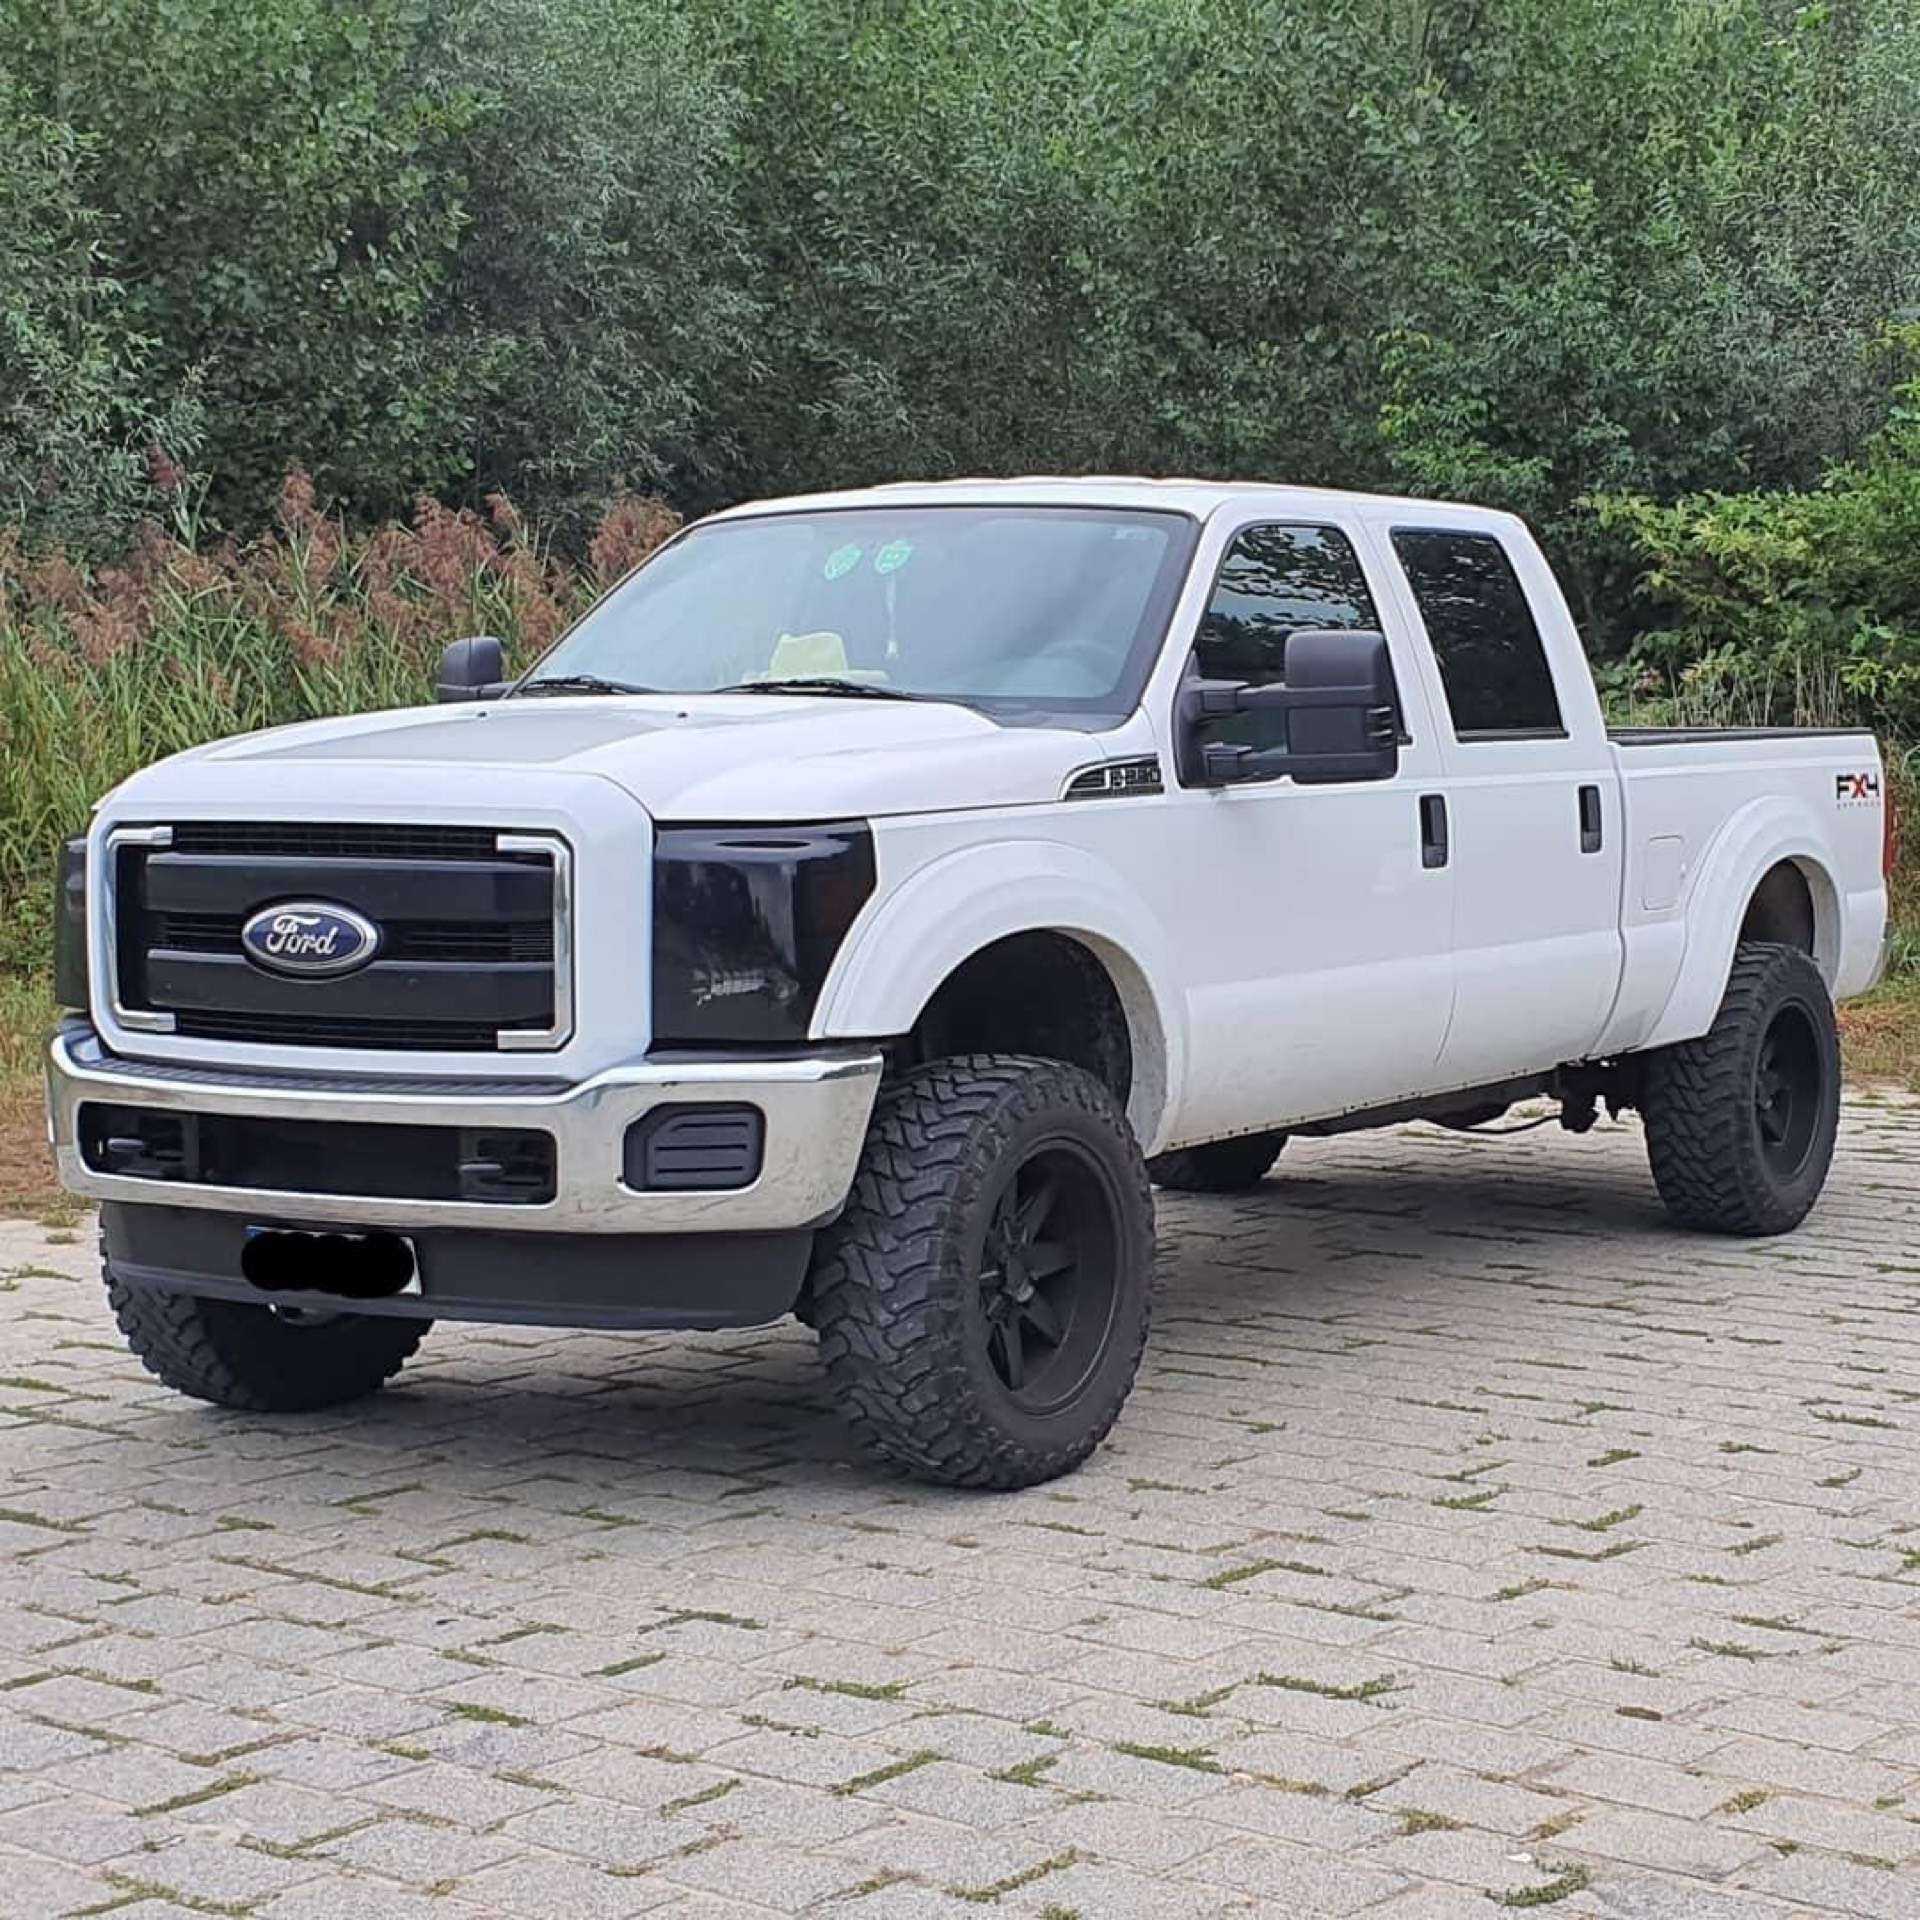 Trucks-Lkw Ford Off-Road/Pick-up in White used in Bad Goisern for € 50,000.-